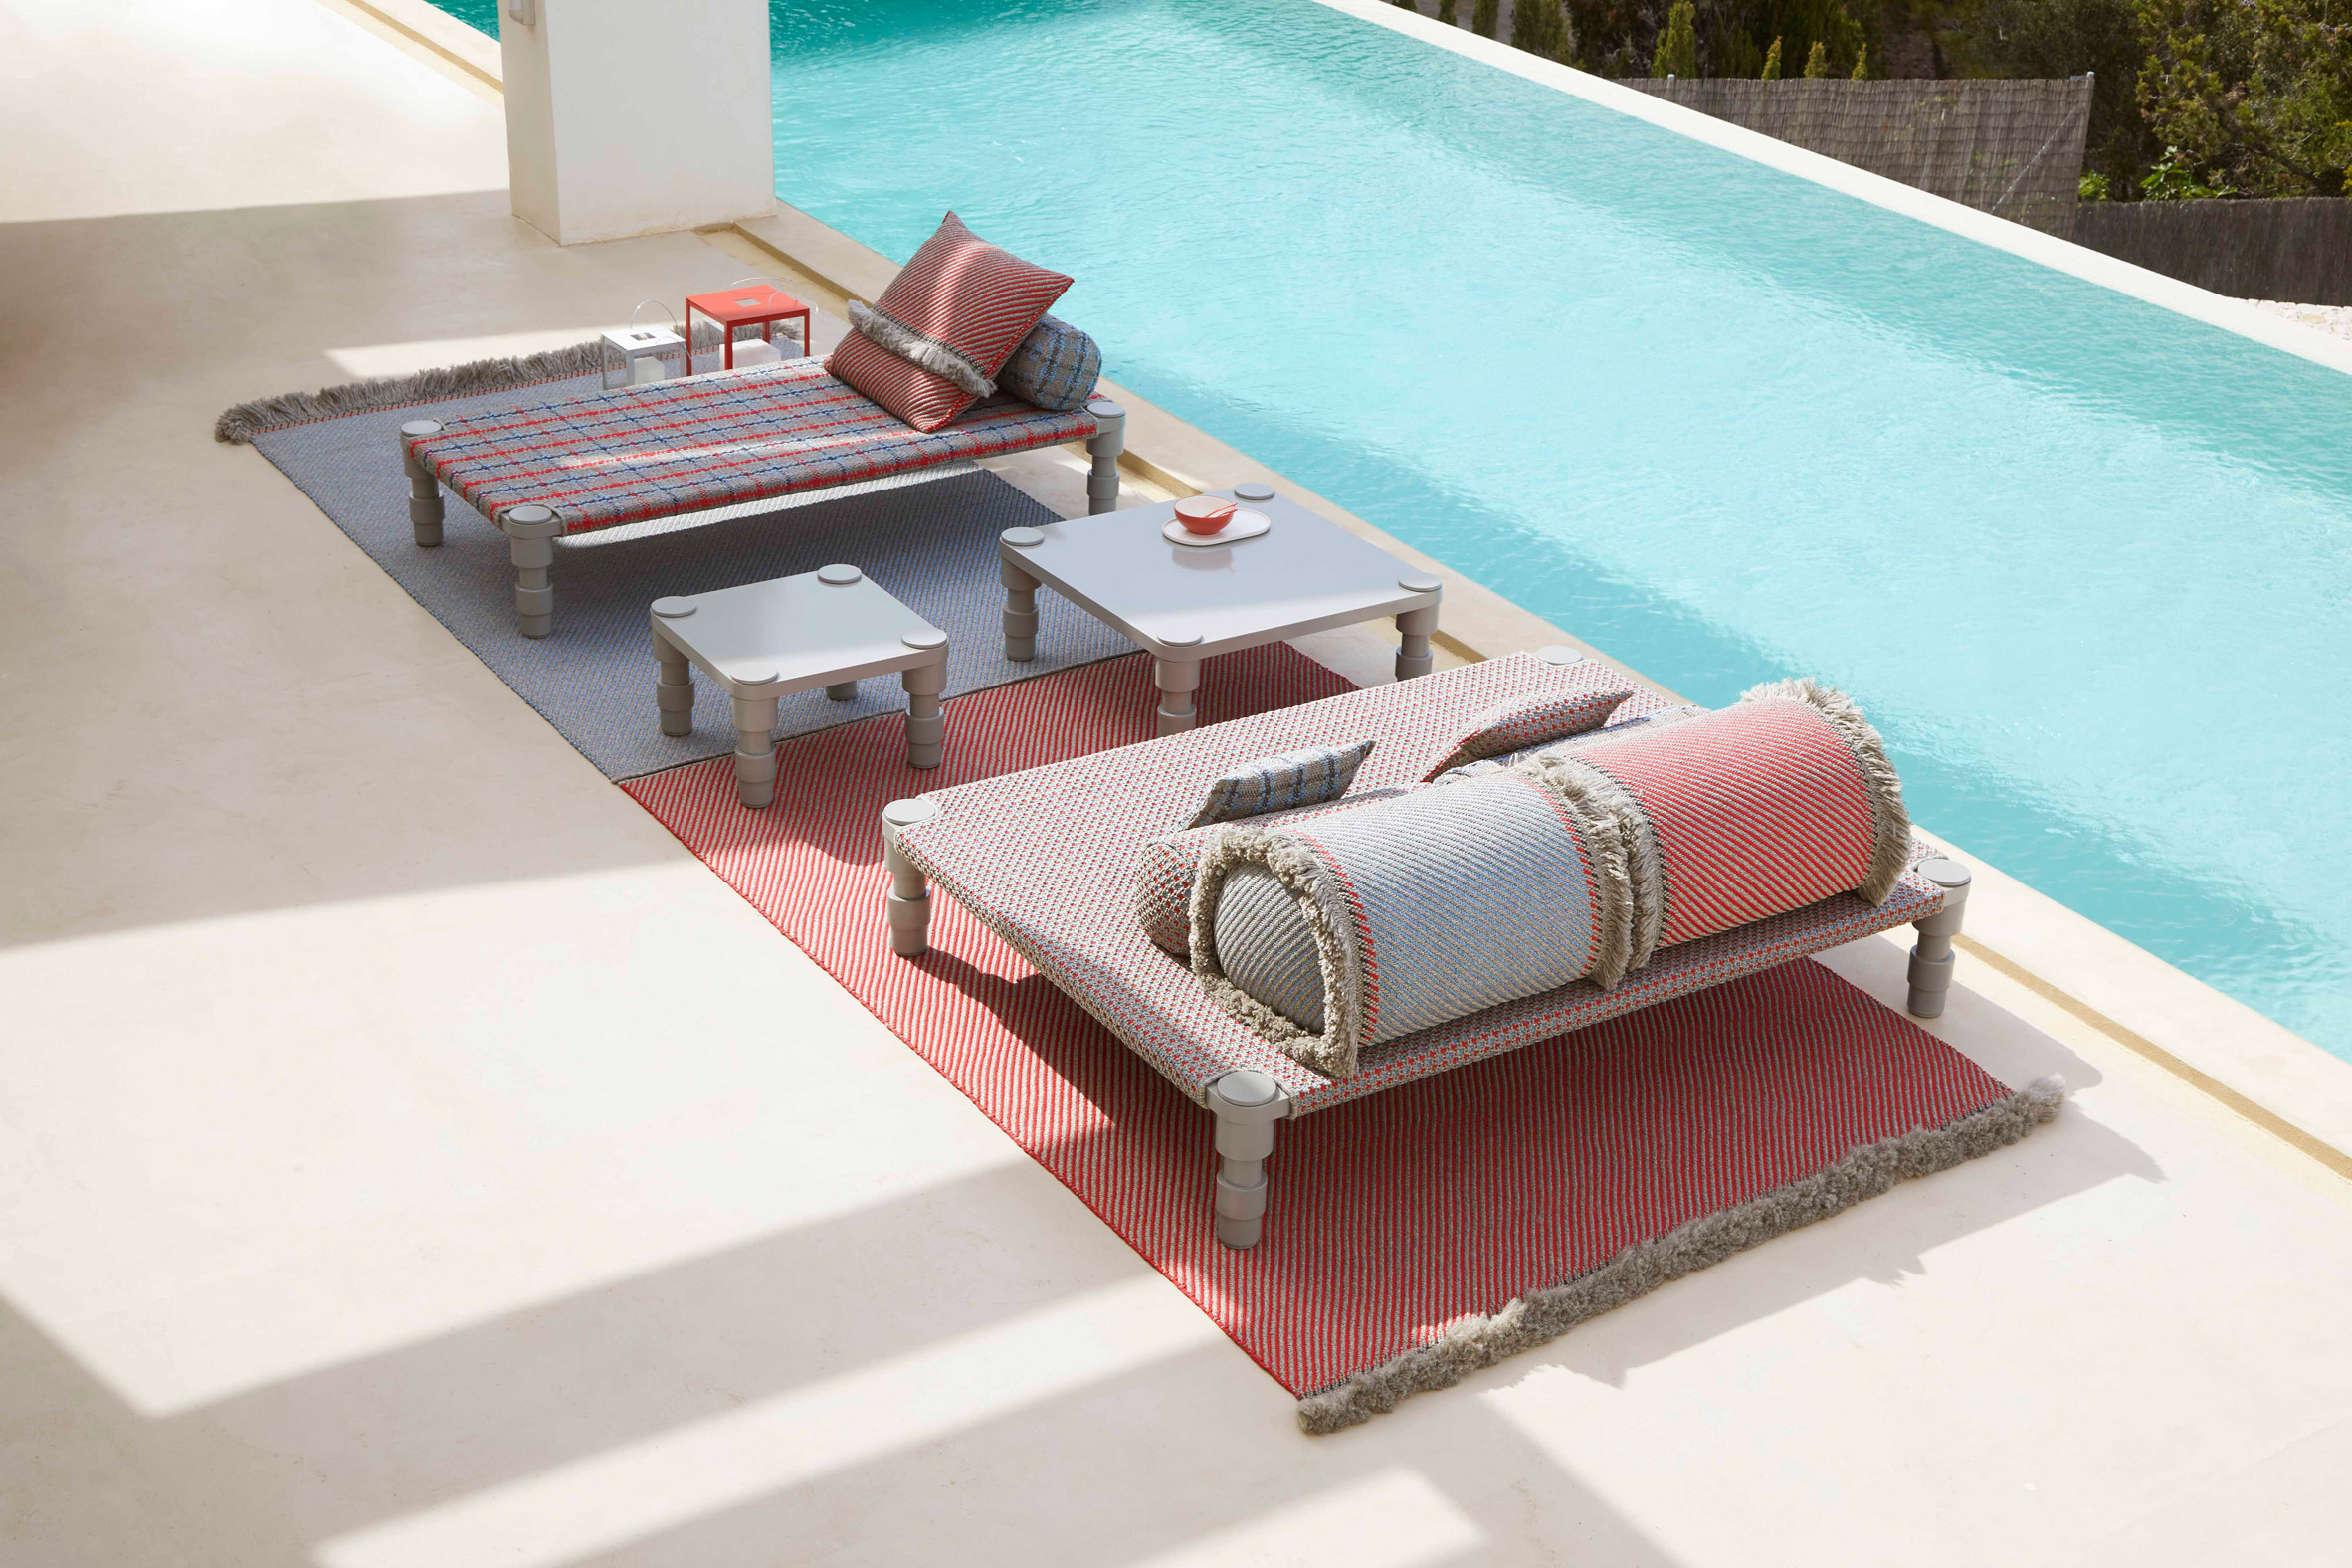 Collection by a pool by Patricia Urquiola